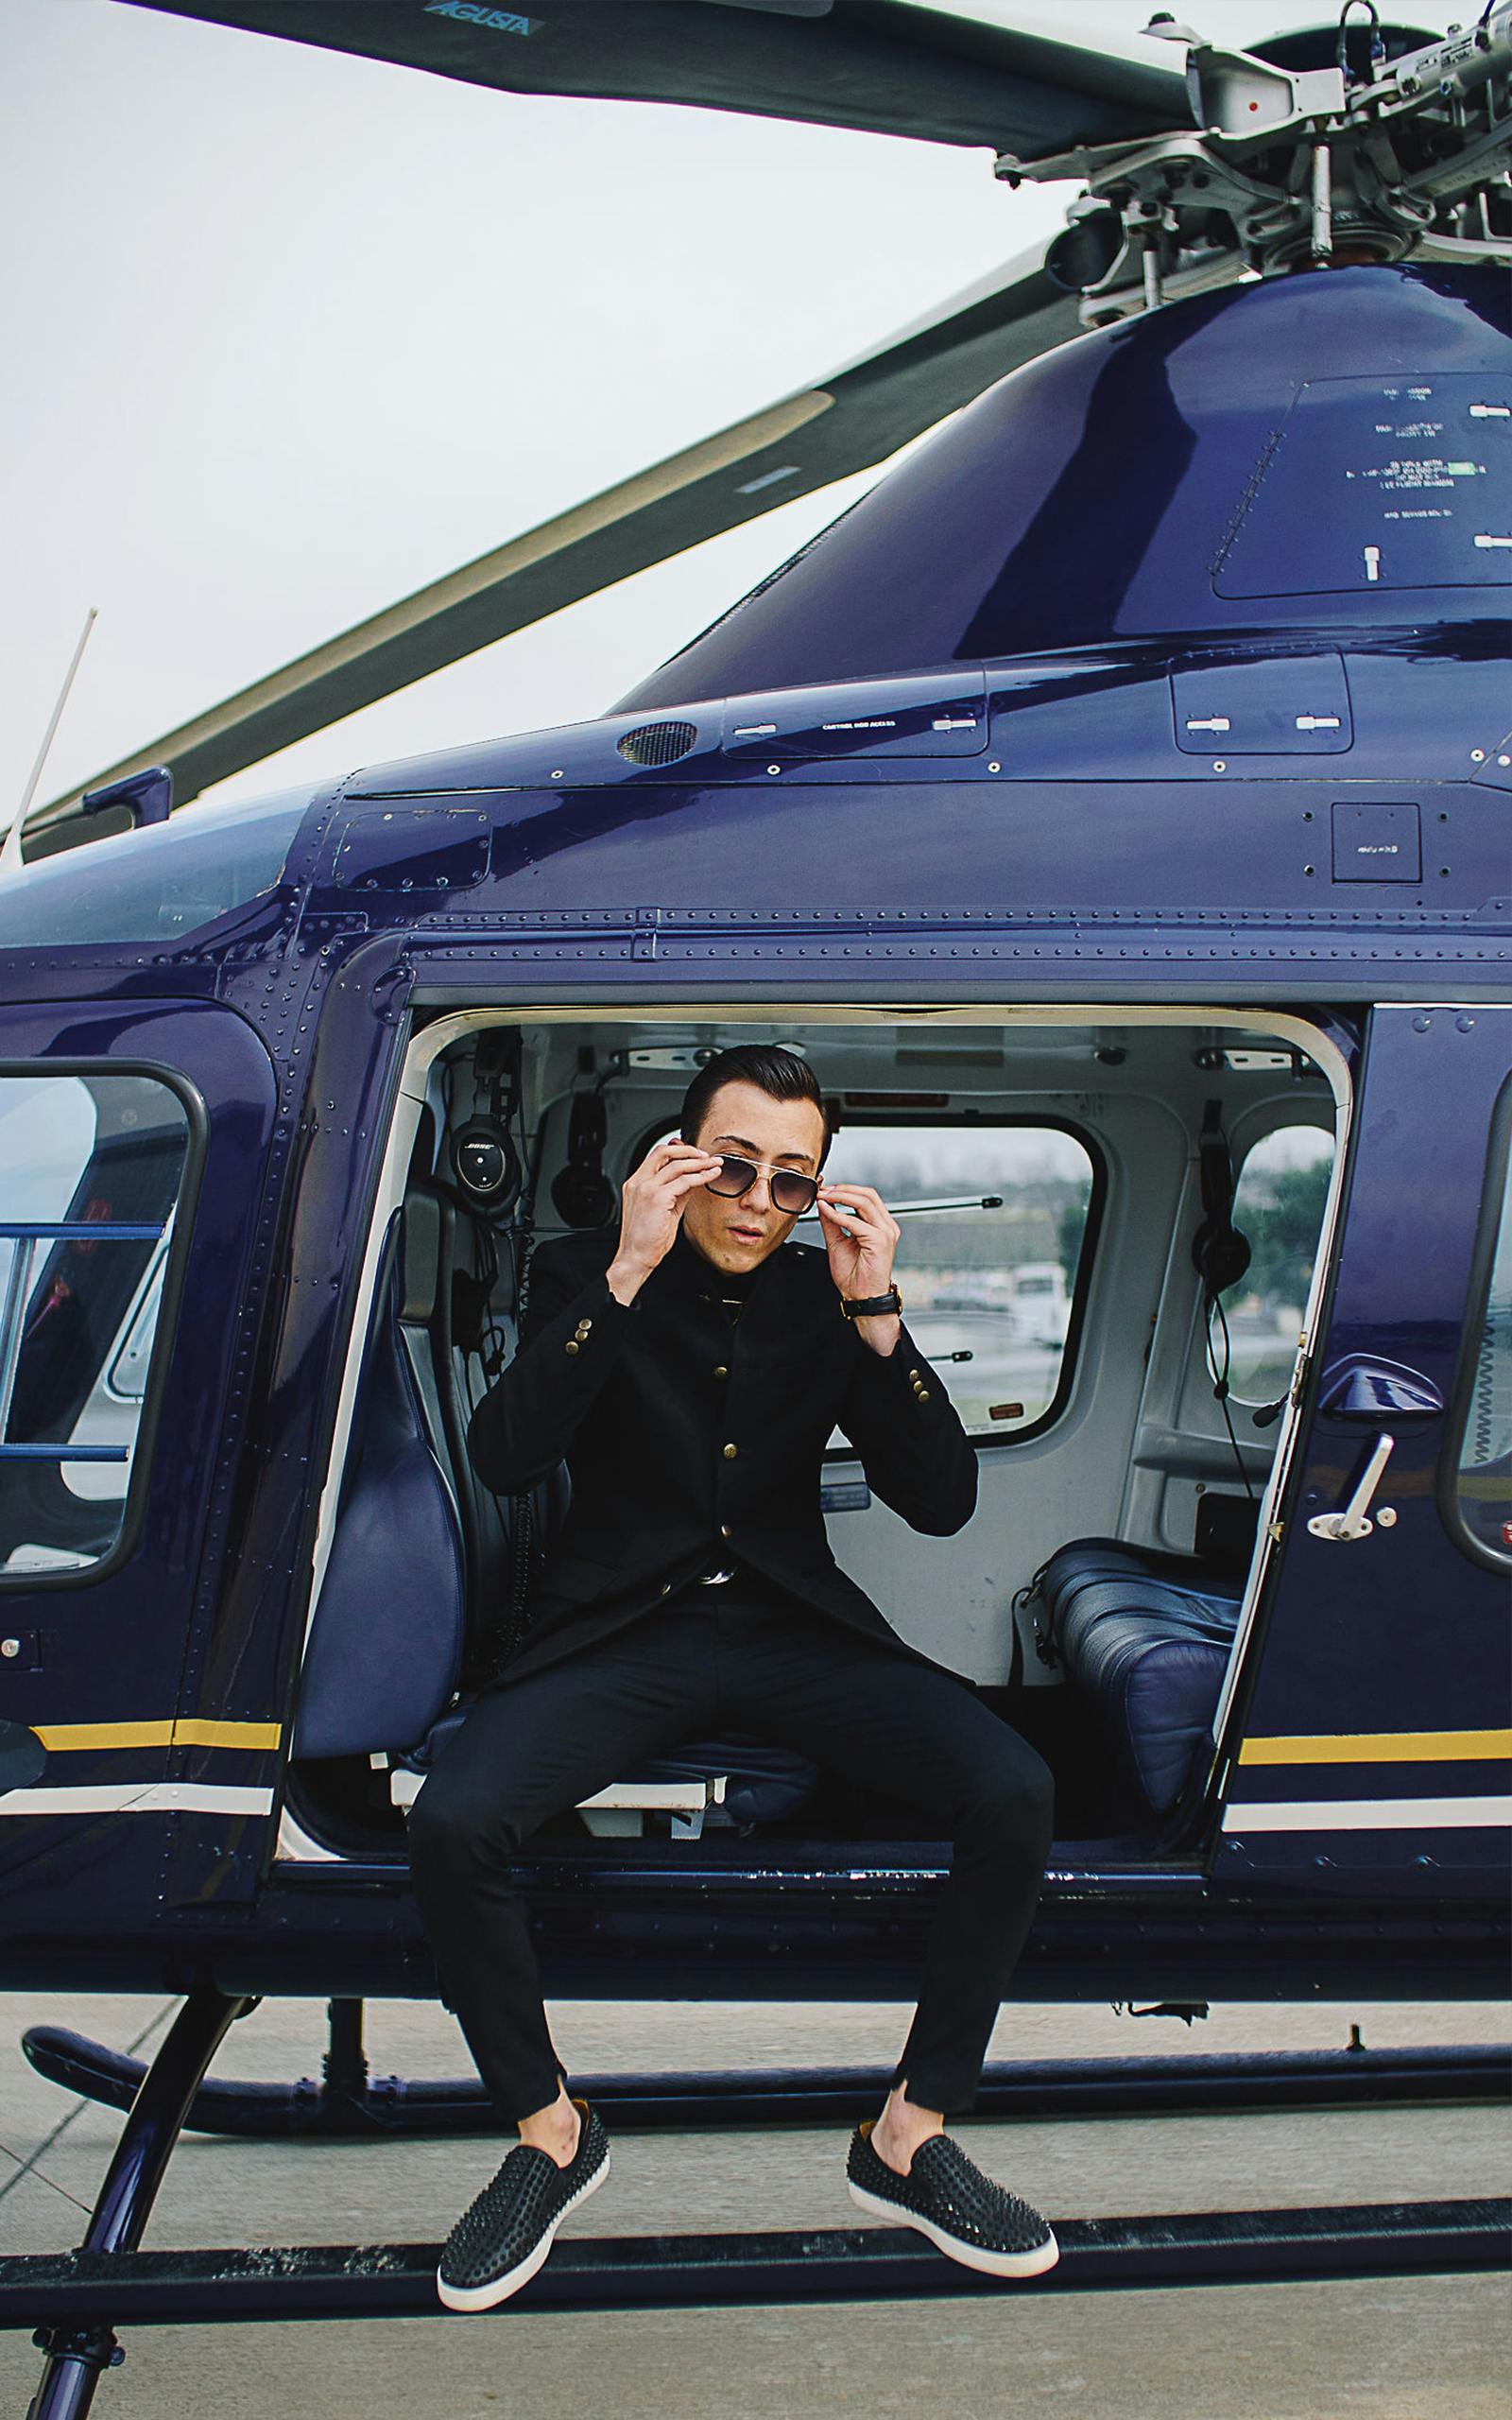 A rich young man inn a helicopter | Source: Pexels